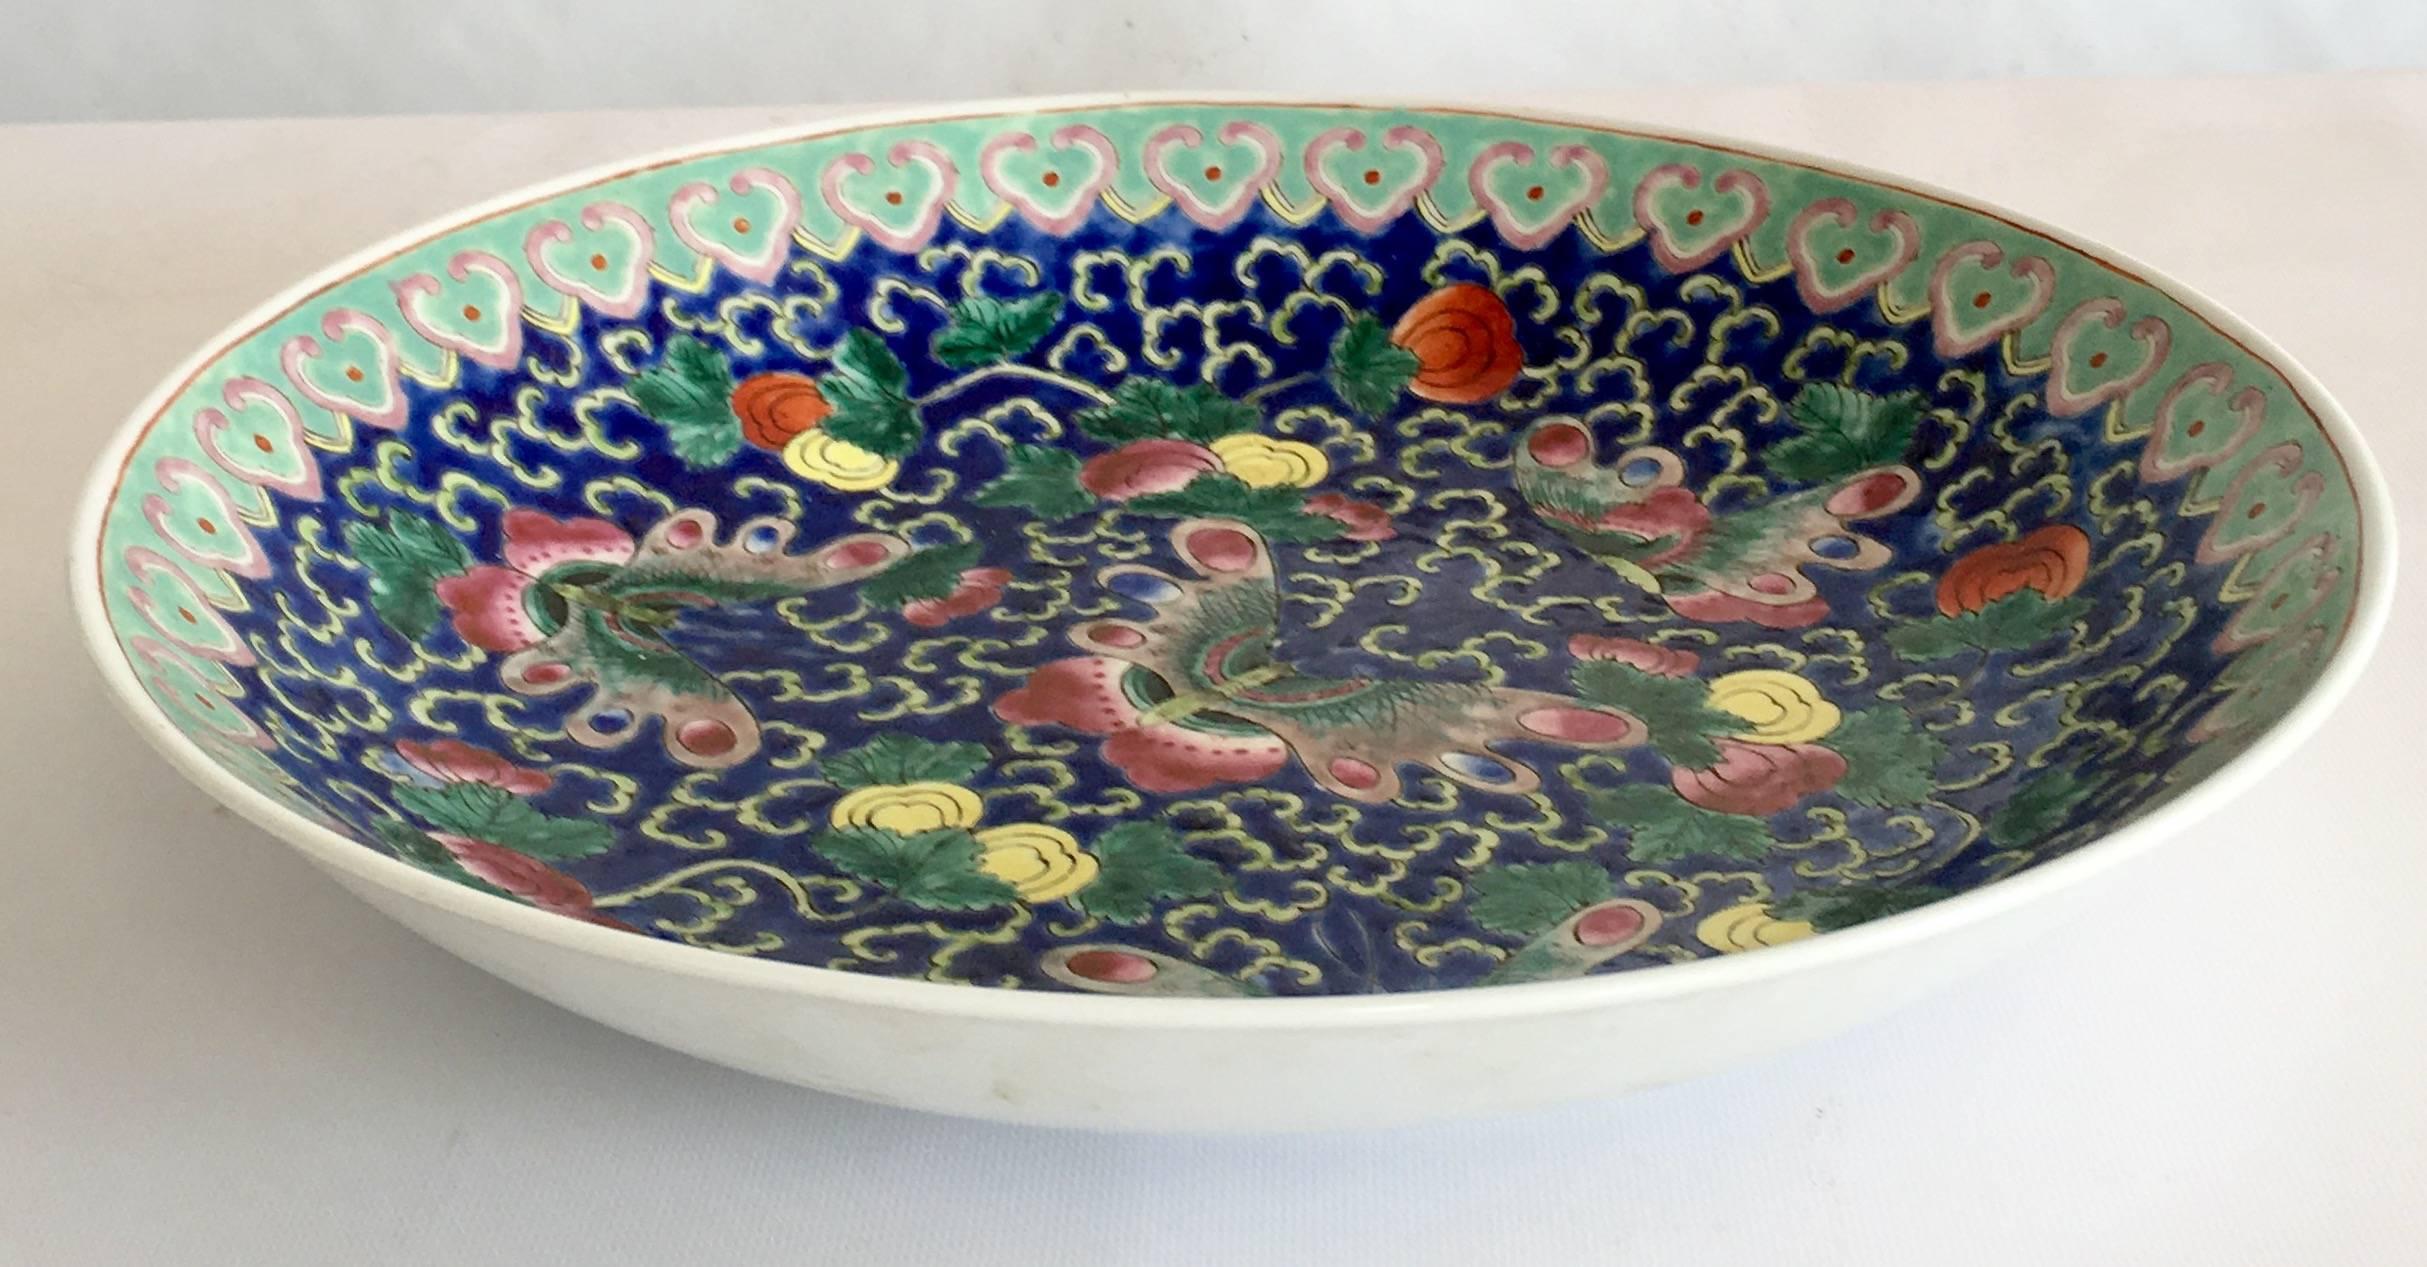 Early 20th century large Chinese export famille butterfly shallow bowl with gold edge. Hand-painted with a vibrant and vivid blue ground and turquoise border.